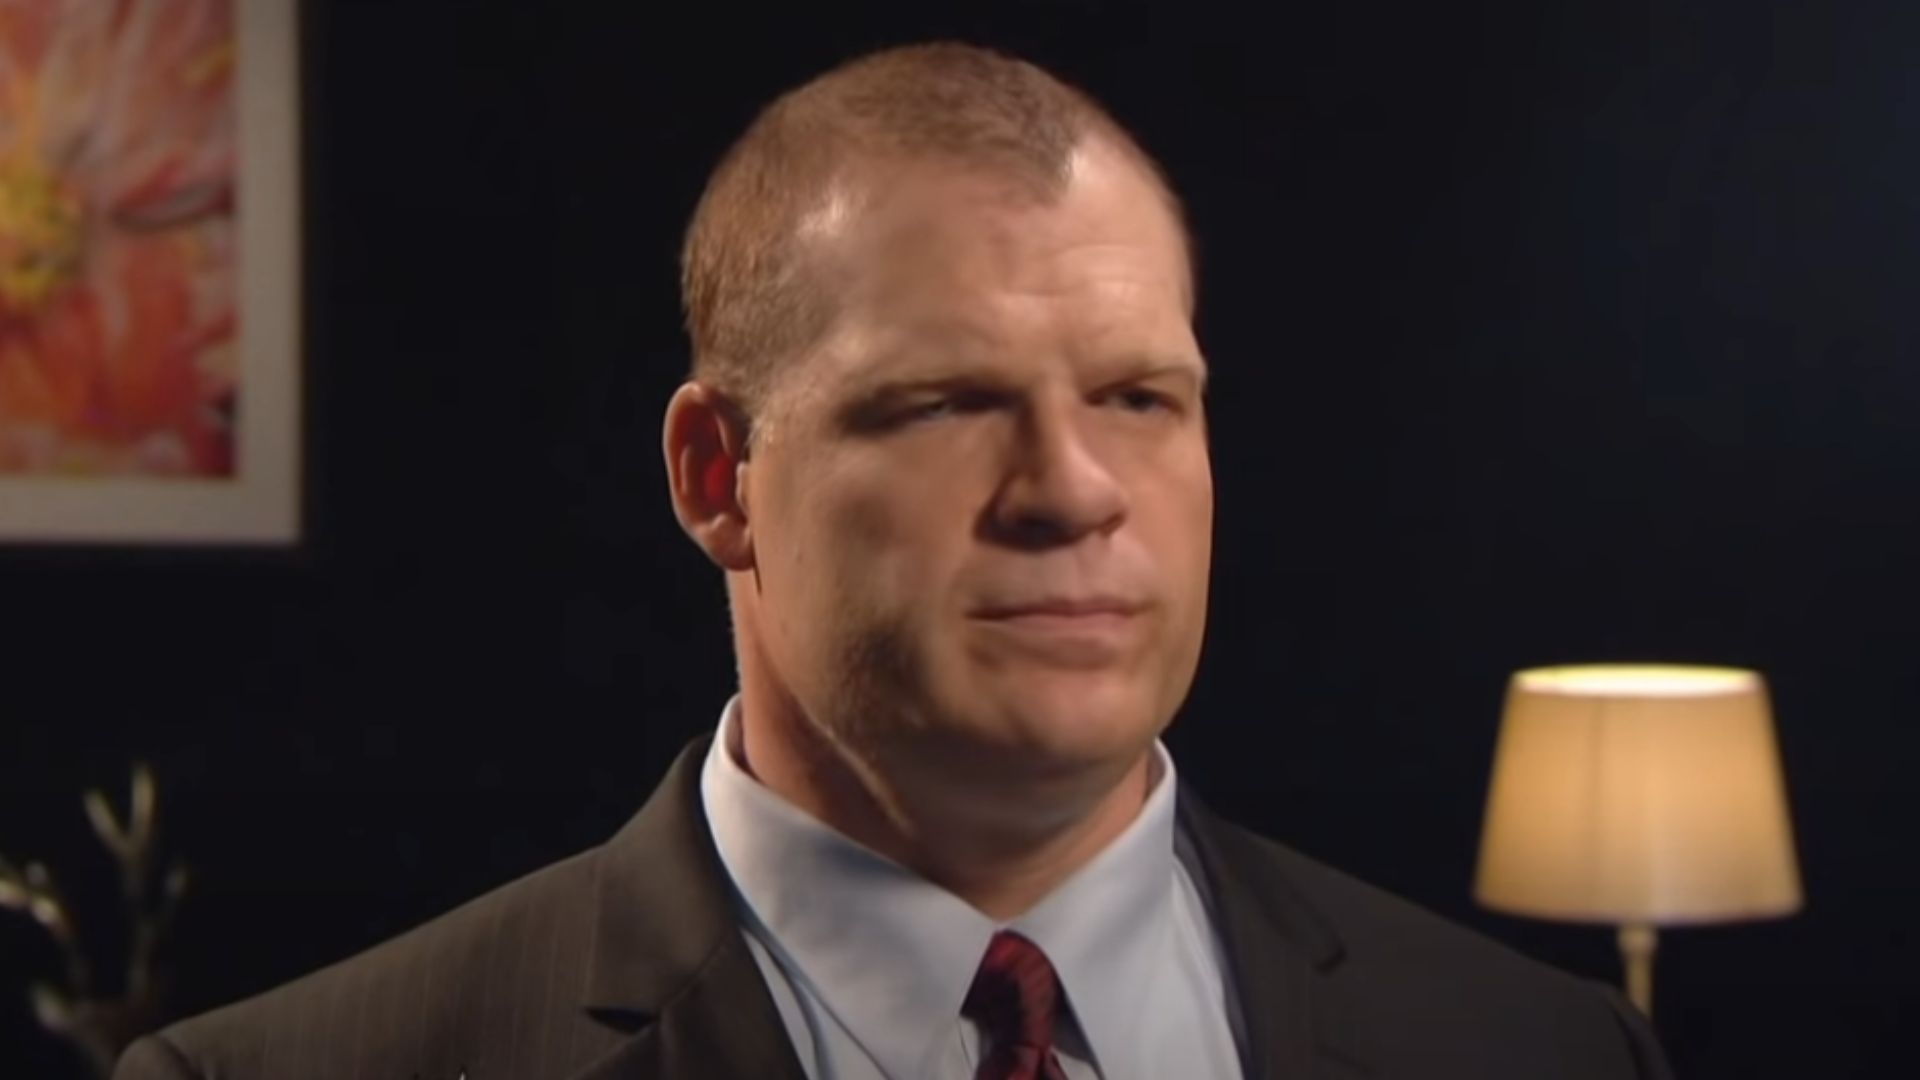 Kane joined the WWE Hall of Fame in 2021.